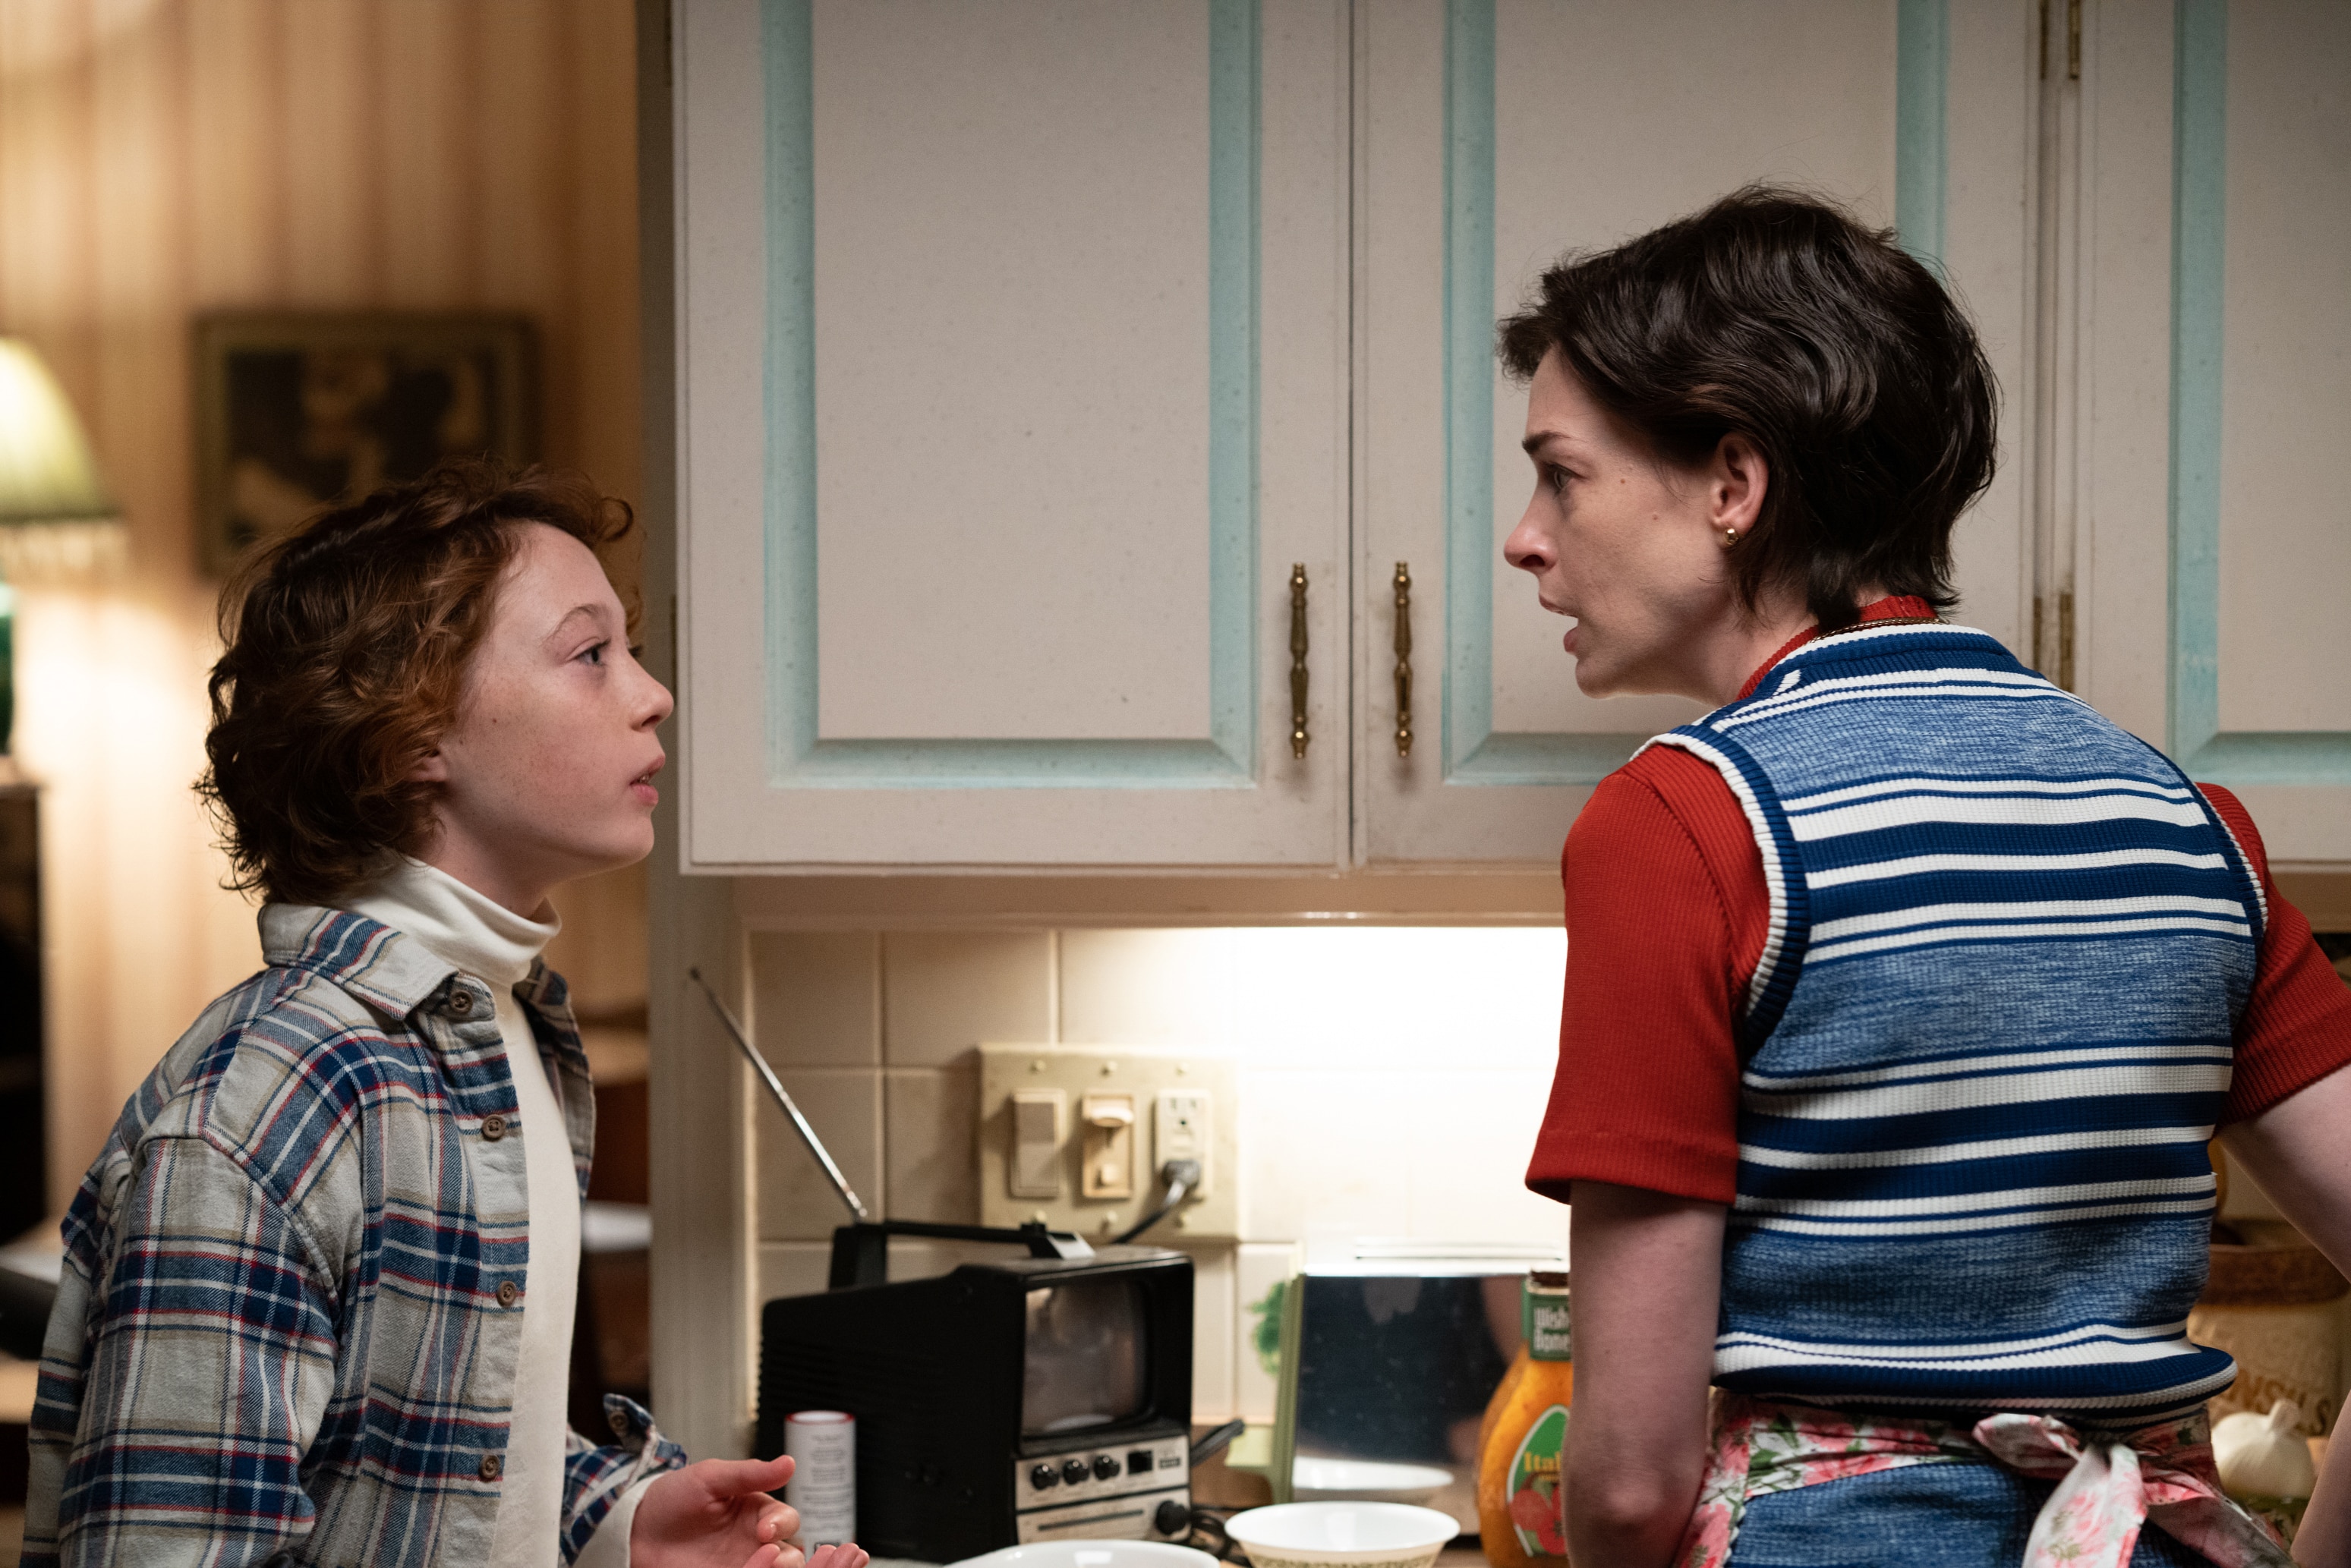 Young white boy with reddish hair wears plaid shirt in kitchen beside his mother; a white woman in red shirt and blue vest.